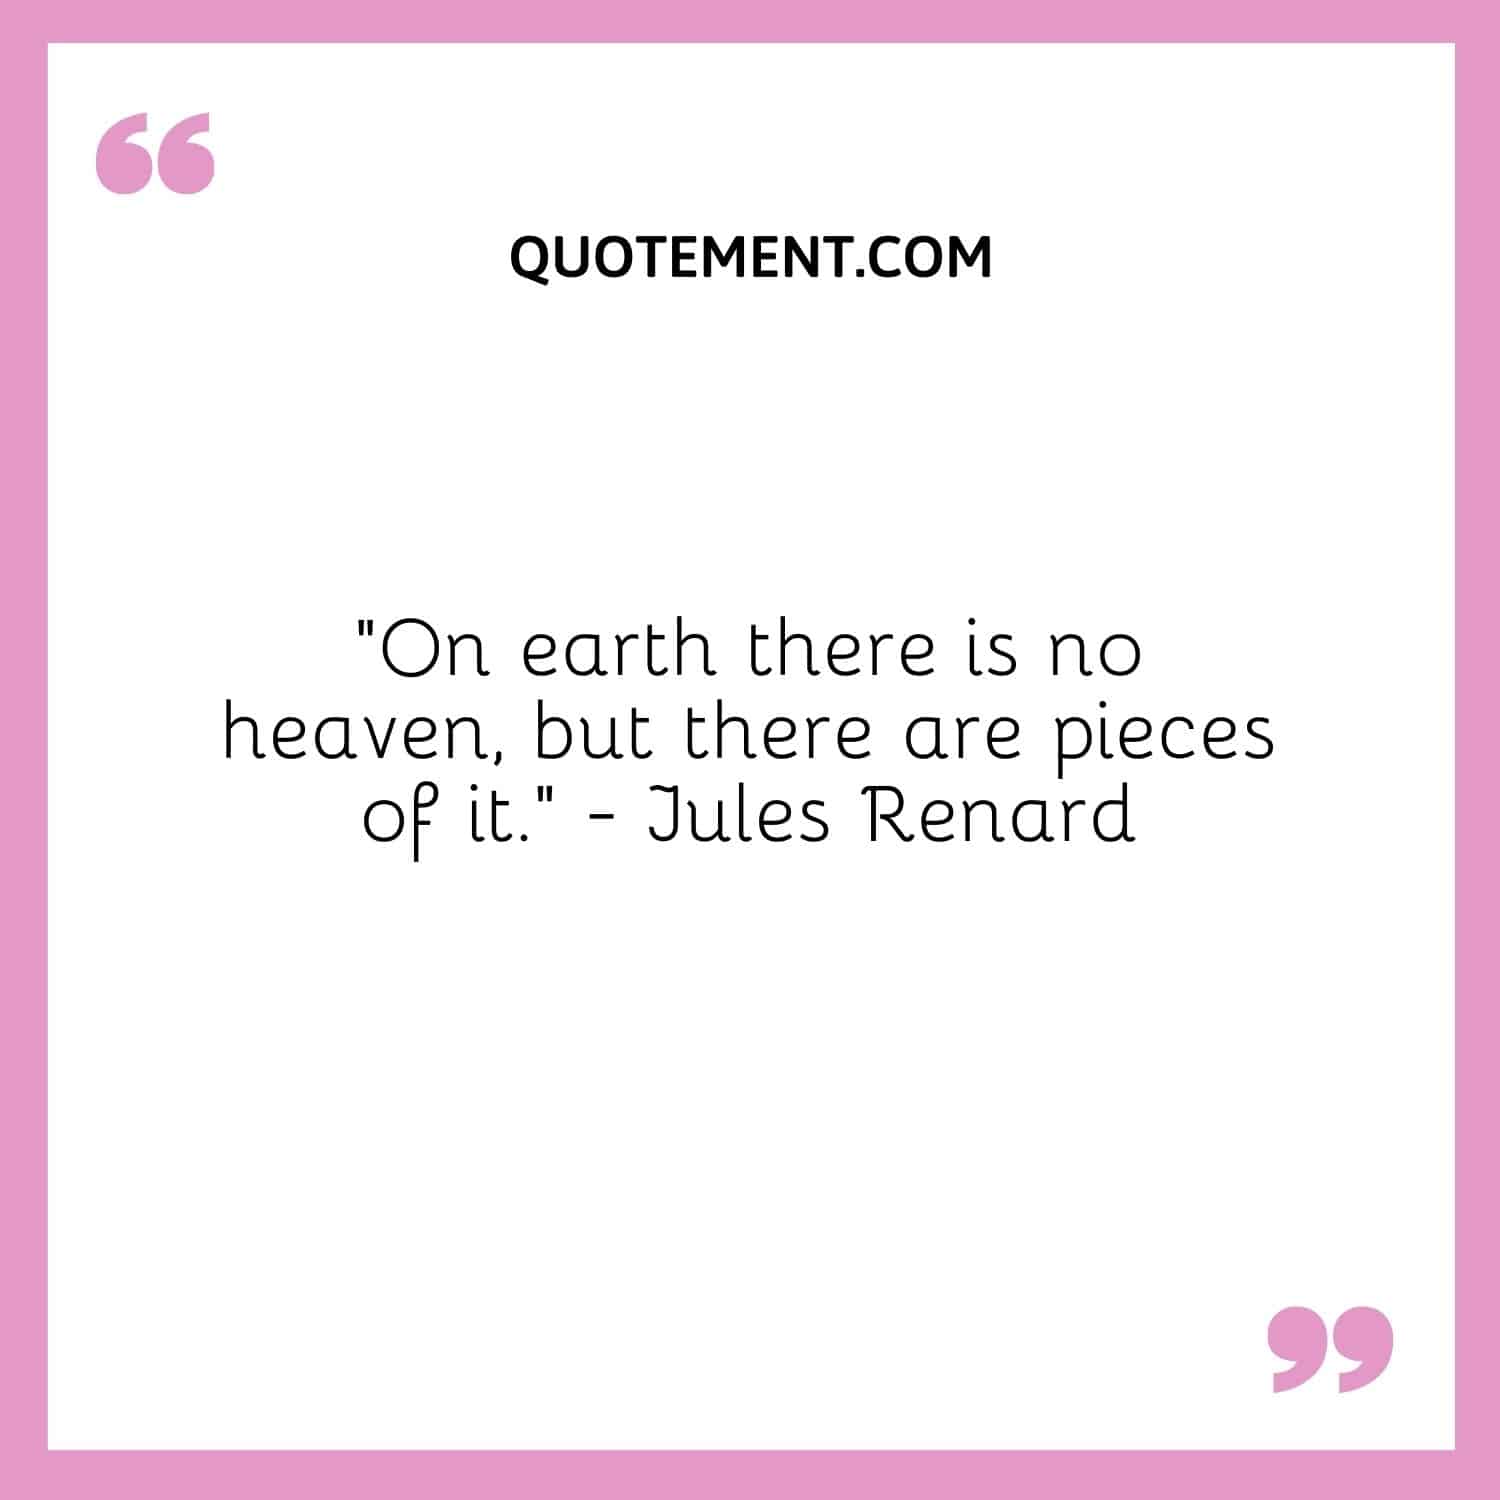 On earth there is no heaven, but there are pieces of it